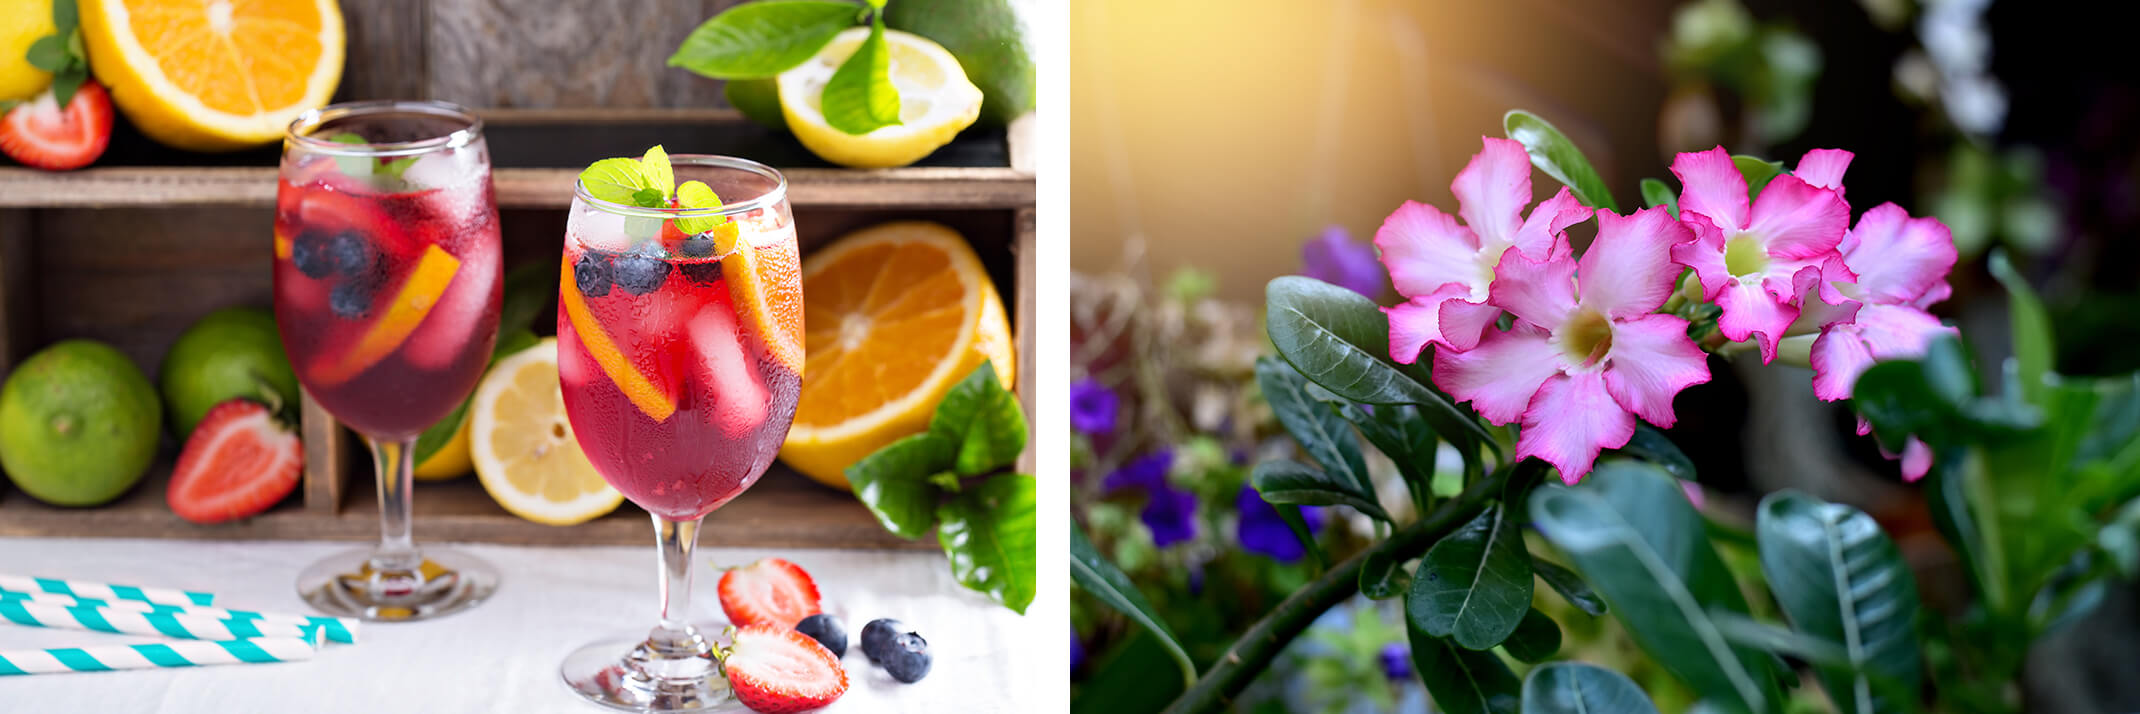 Refreshing punch drink with fresh fruits, and a beautiful pink adenium with purple flowers in the background.